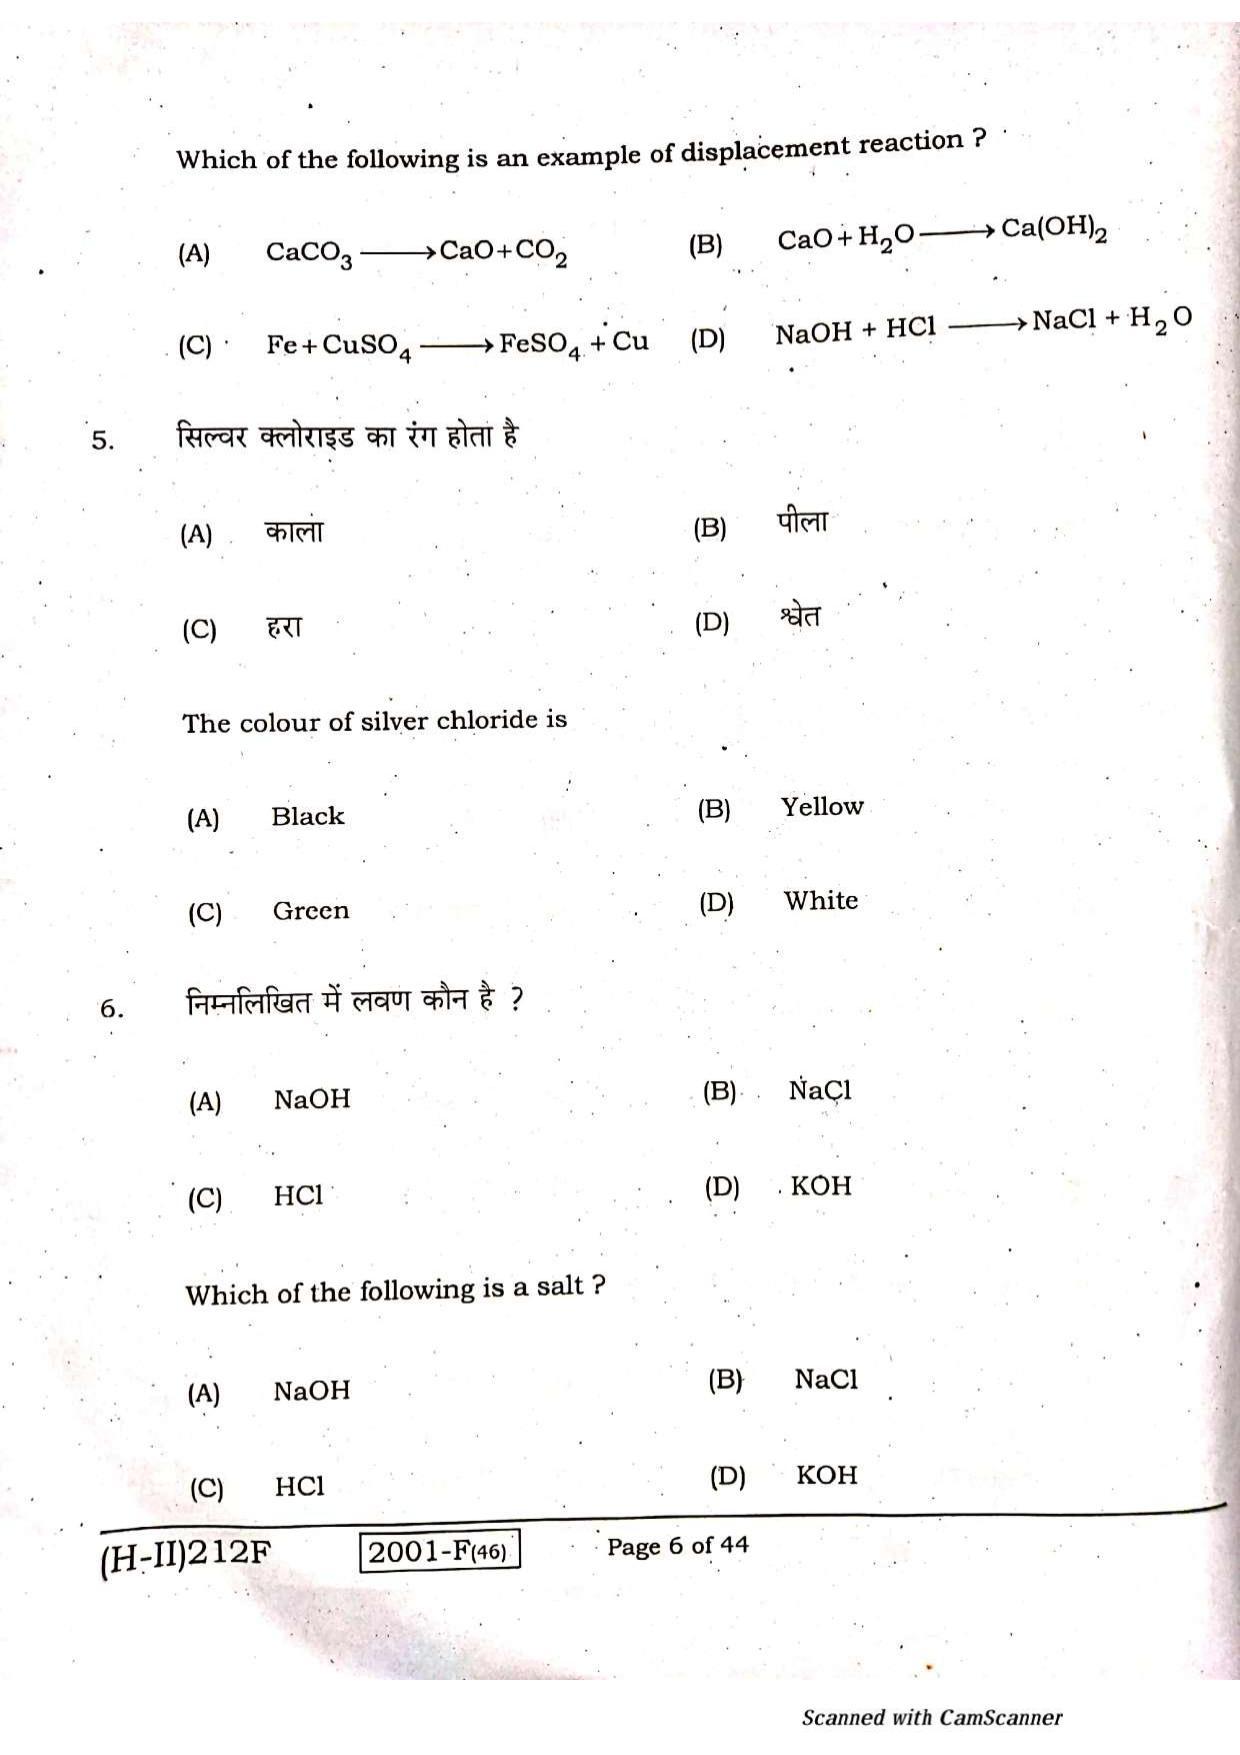 Bihar Board Class 10 Science 2021 (2nd Sitting) Question Paper - Page 4